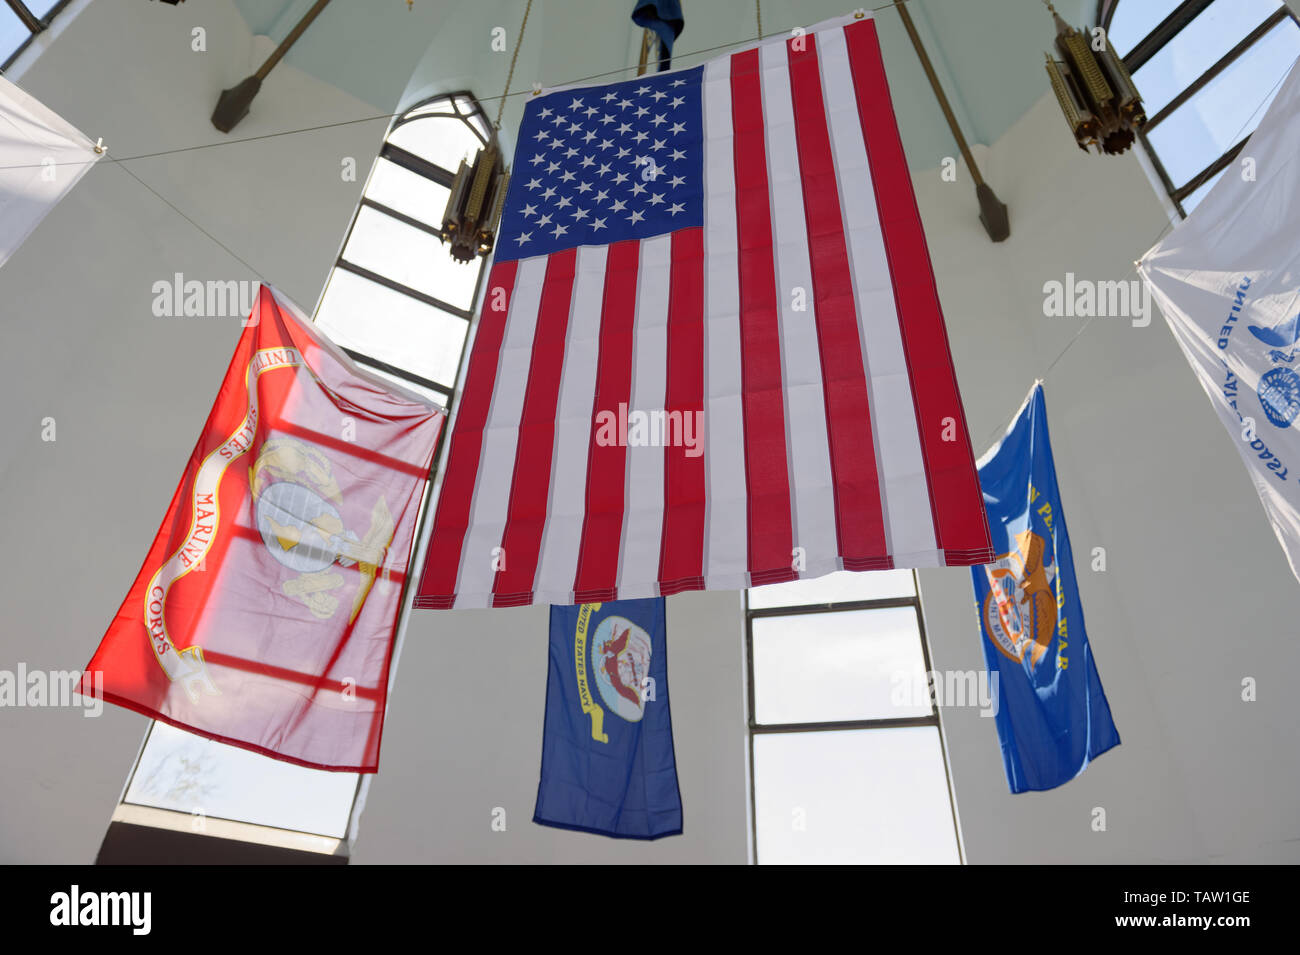 East Meadow, New York, USA. 25th May, 2019. The American Flag and military flags of the United States Armed Forces - Army, Navy, Marine Corps, Air Force, Coast Guard - are suspended in the high ceiling of The Veterans Memorial building, open for visitors during Saturday of Memorial Day Weekend at Eisenhower Park on Long Island. Credit: Ann Parry/ZUMA Wire/Alamy Live News Stock Photo